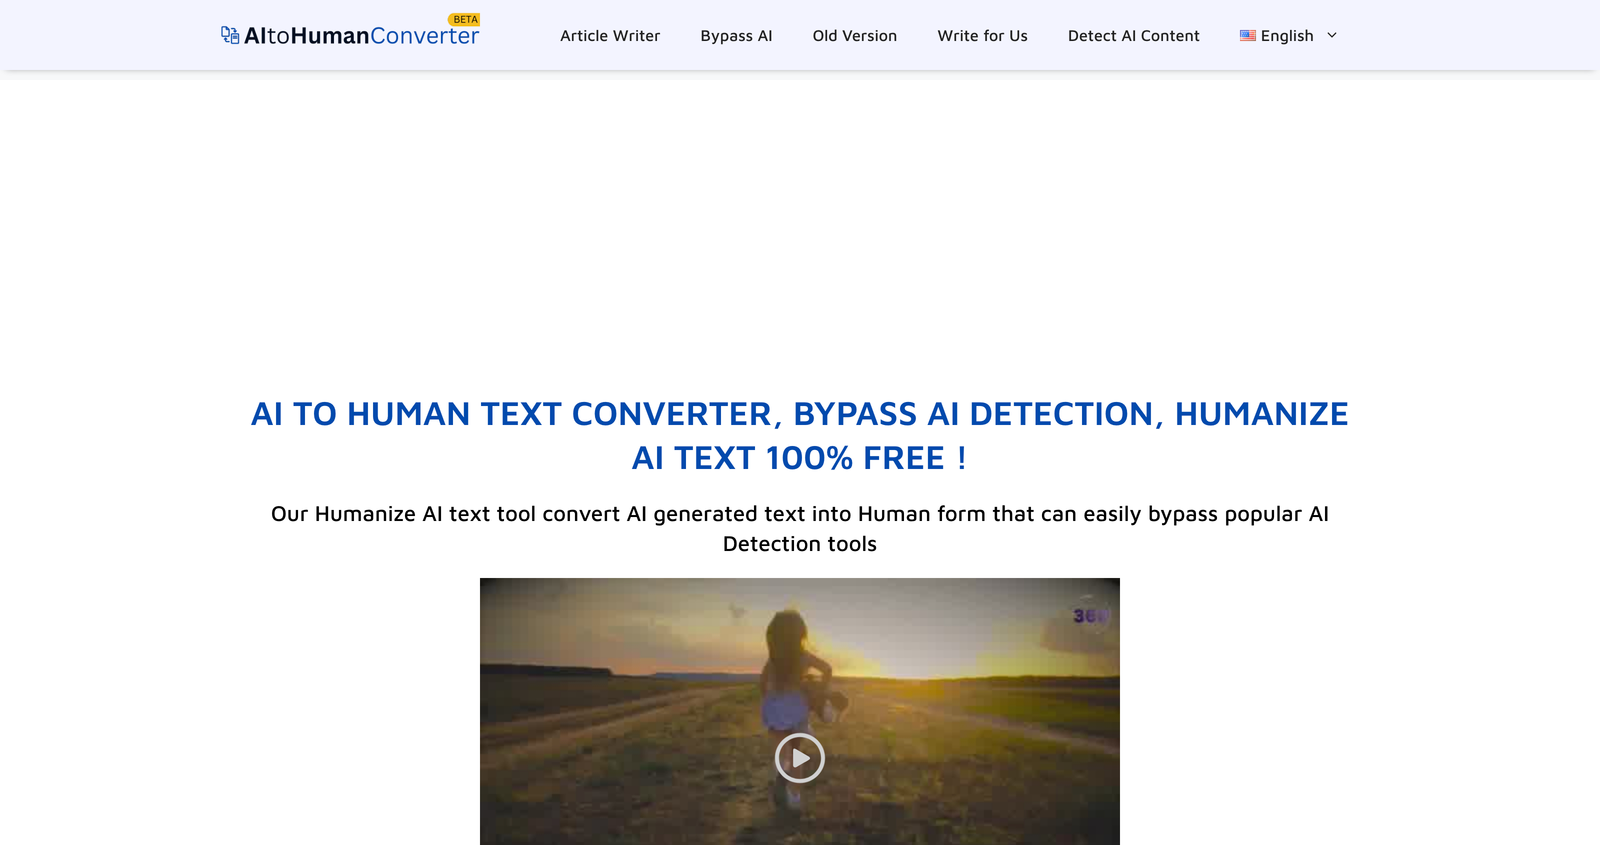 AI to Human Text Converter | Bypass AI Detection 100% Free | Humanize Ai Text - AI to Human Converter